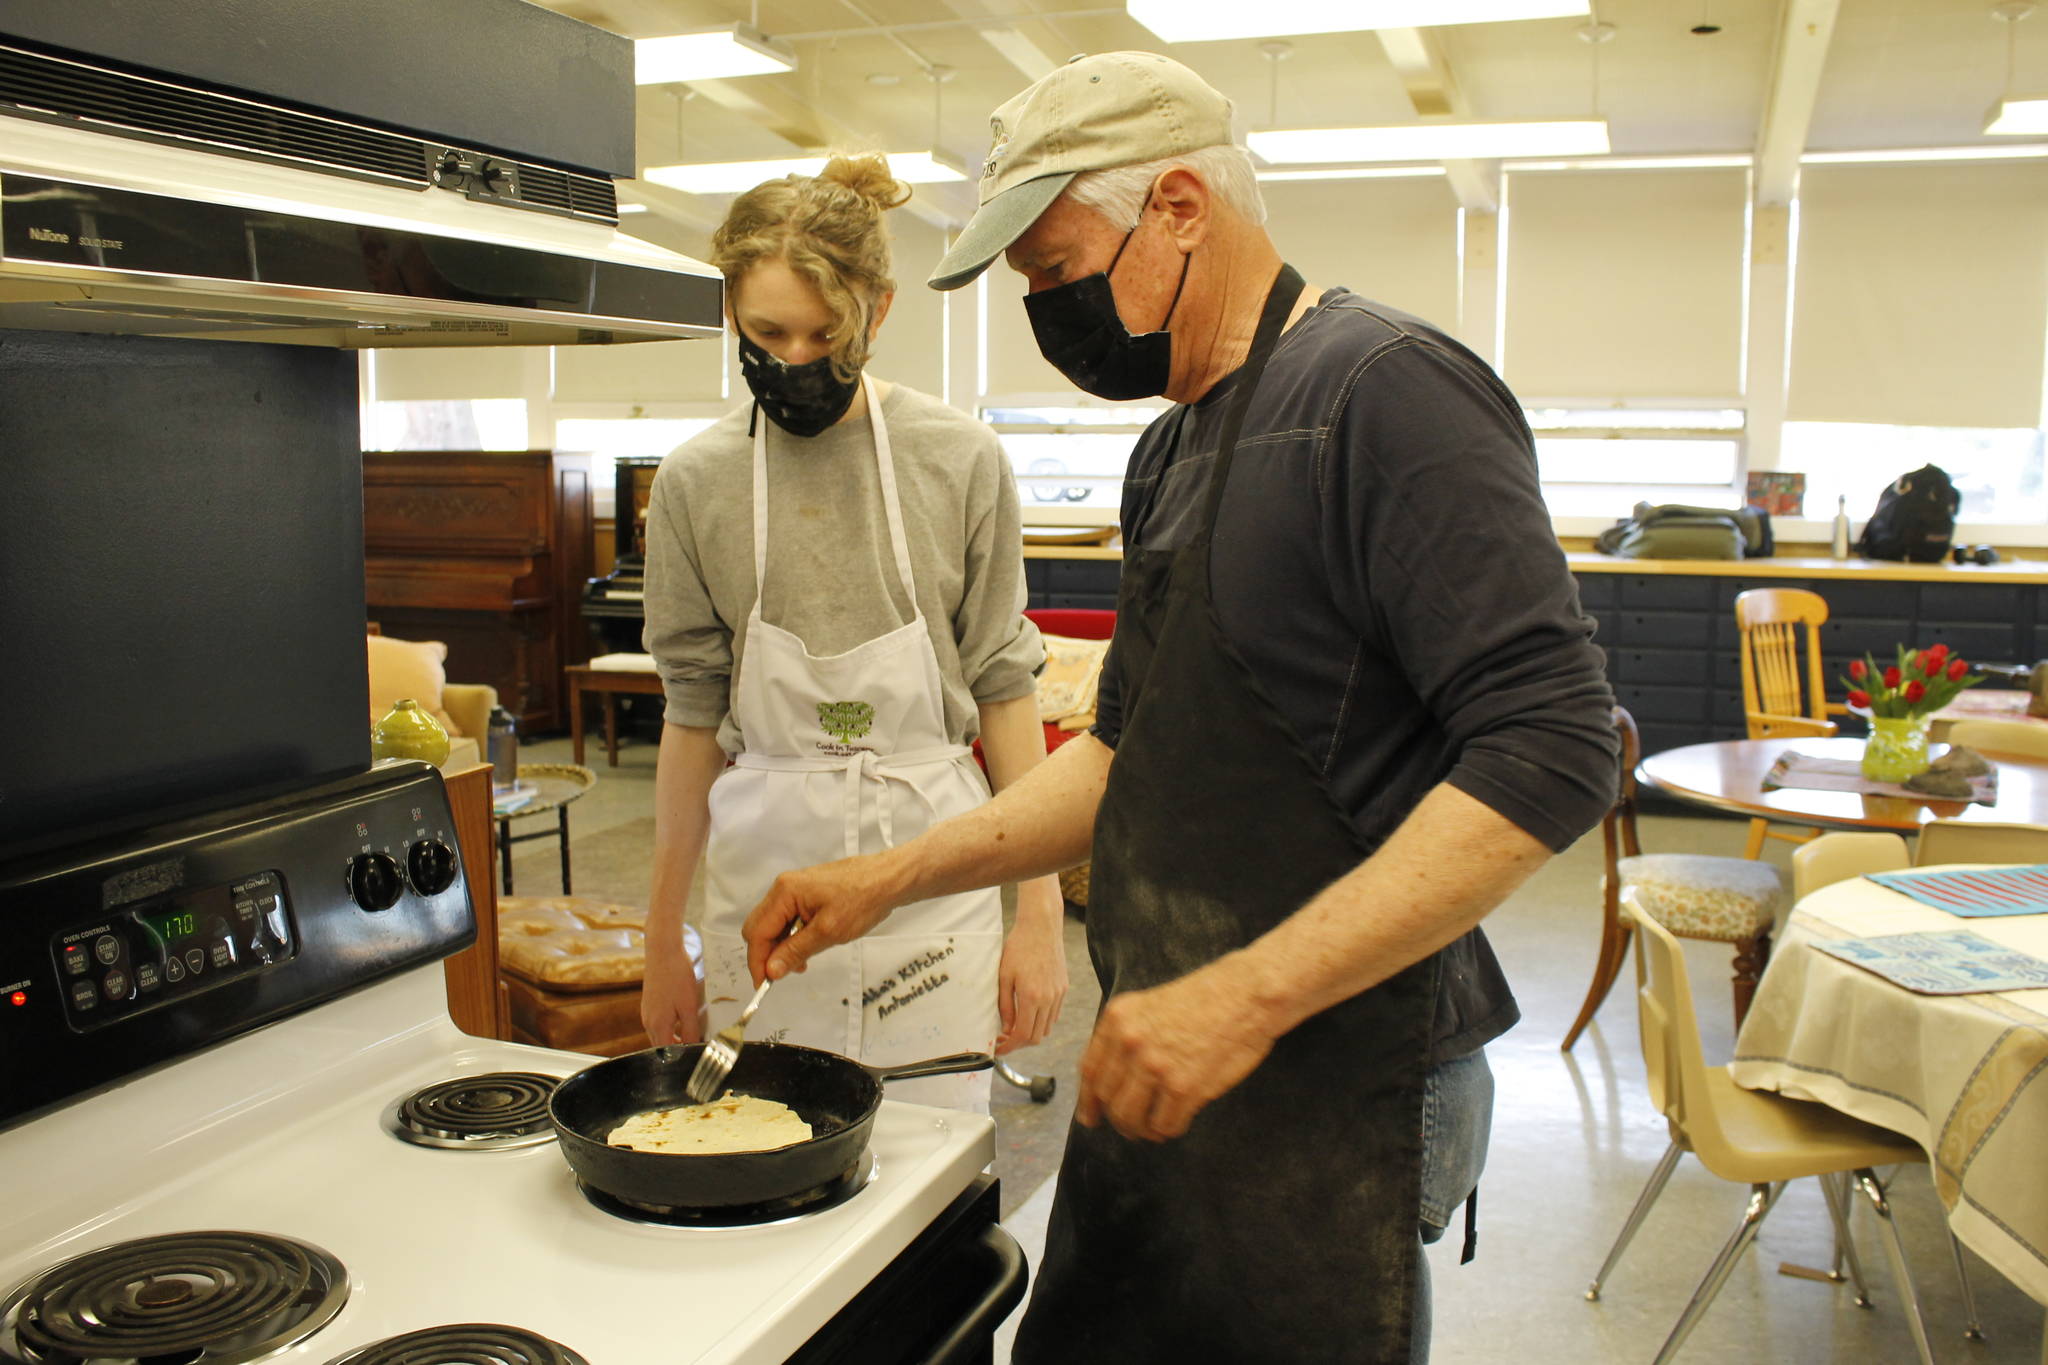 Joe Whisenand, right, shows freshman Spencer Jonas how to make a tortilla in the Learning Lab at Langley. (Photo by Kira Erickson/South Whidbey Record)